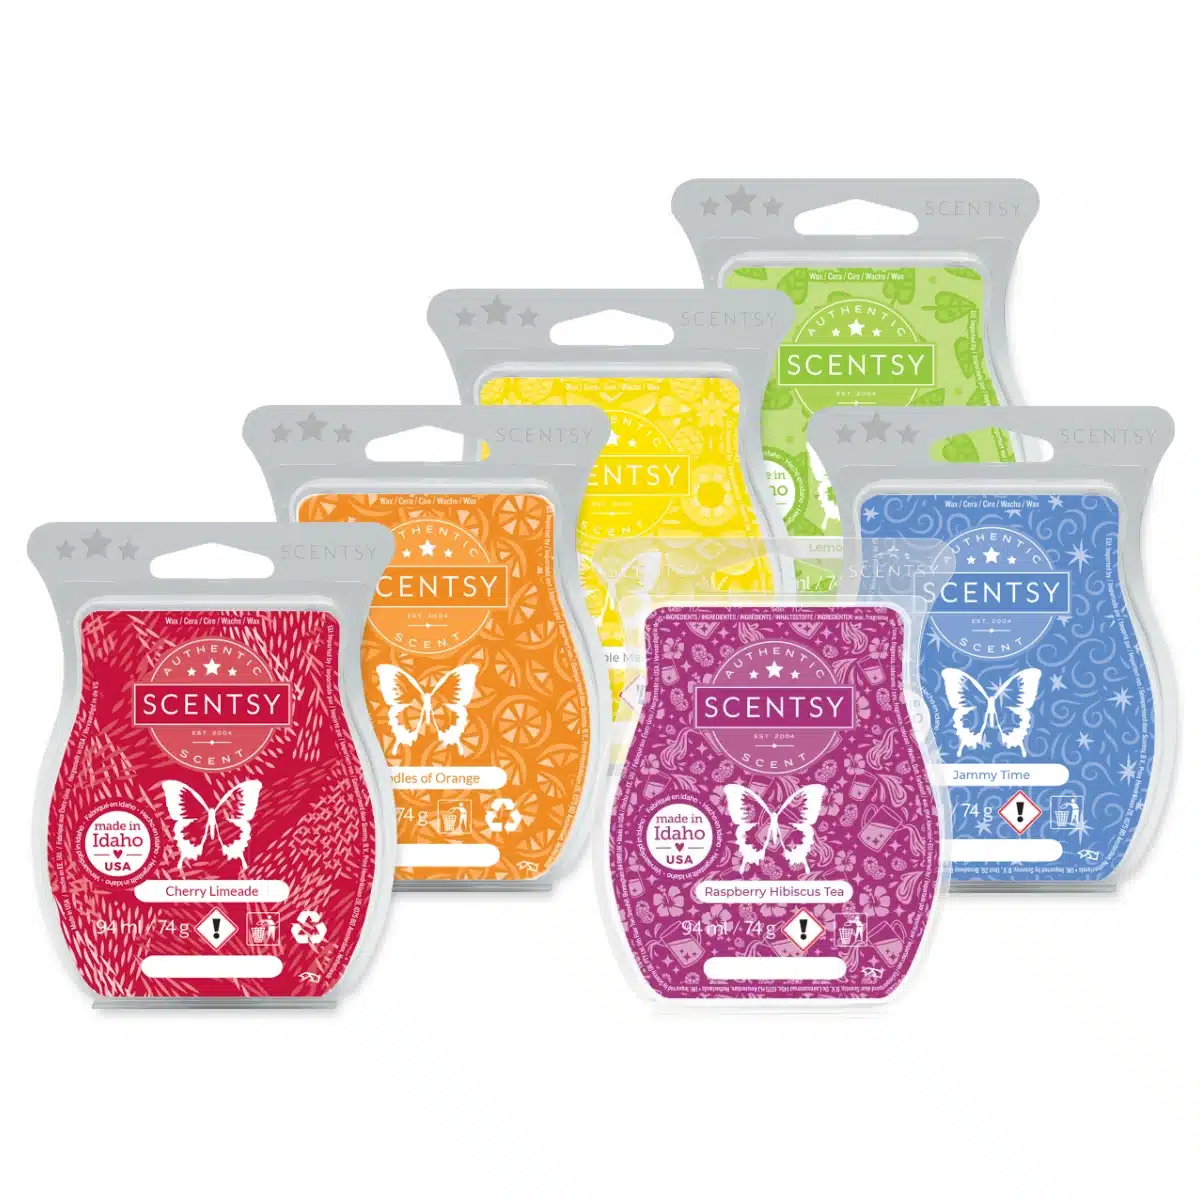 Scentsy 6 Bar Multipack, Buy 6 For The Price Of 5 - The Candle Boutique